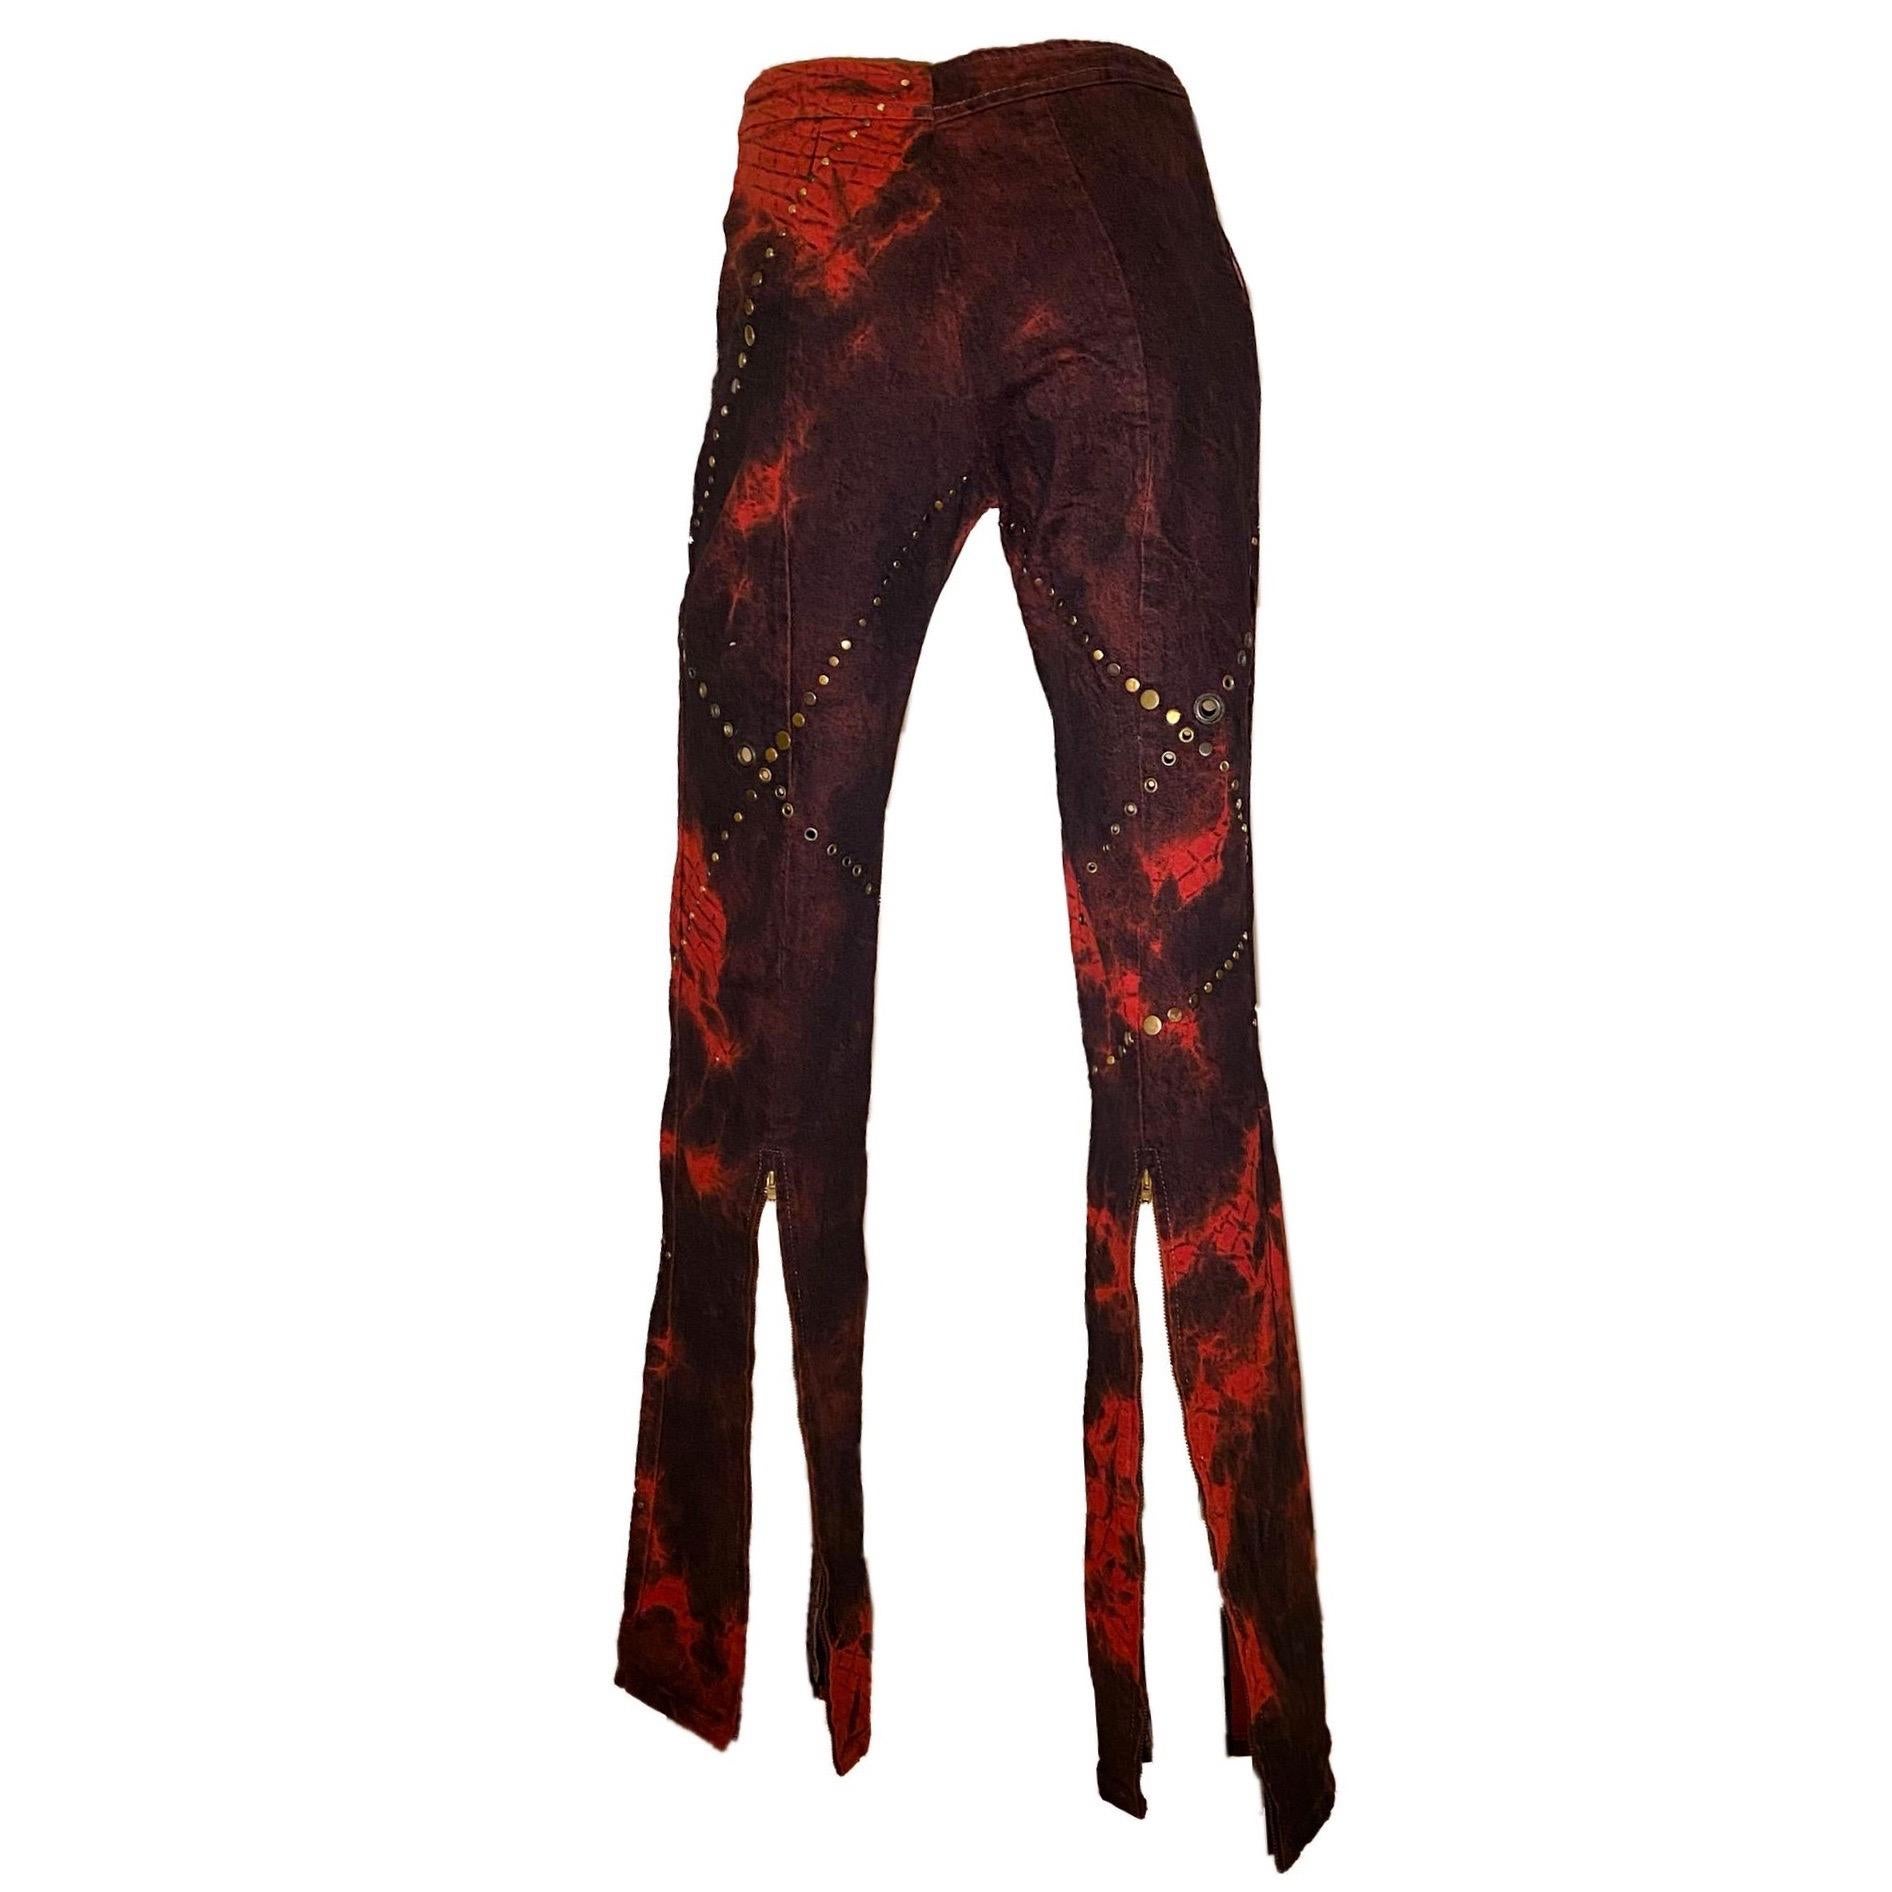 Emanuel Ungaro F/W 2000 Tie Dye Studded Jeans In Excellent Condition For Sale In Rome, IT